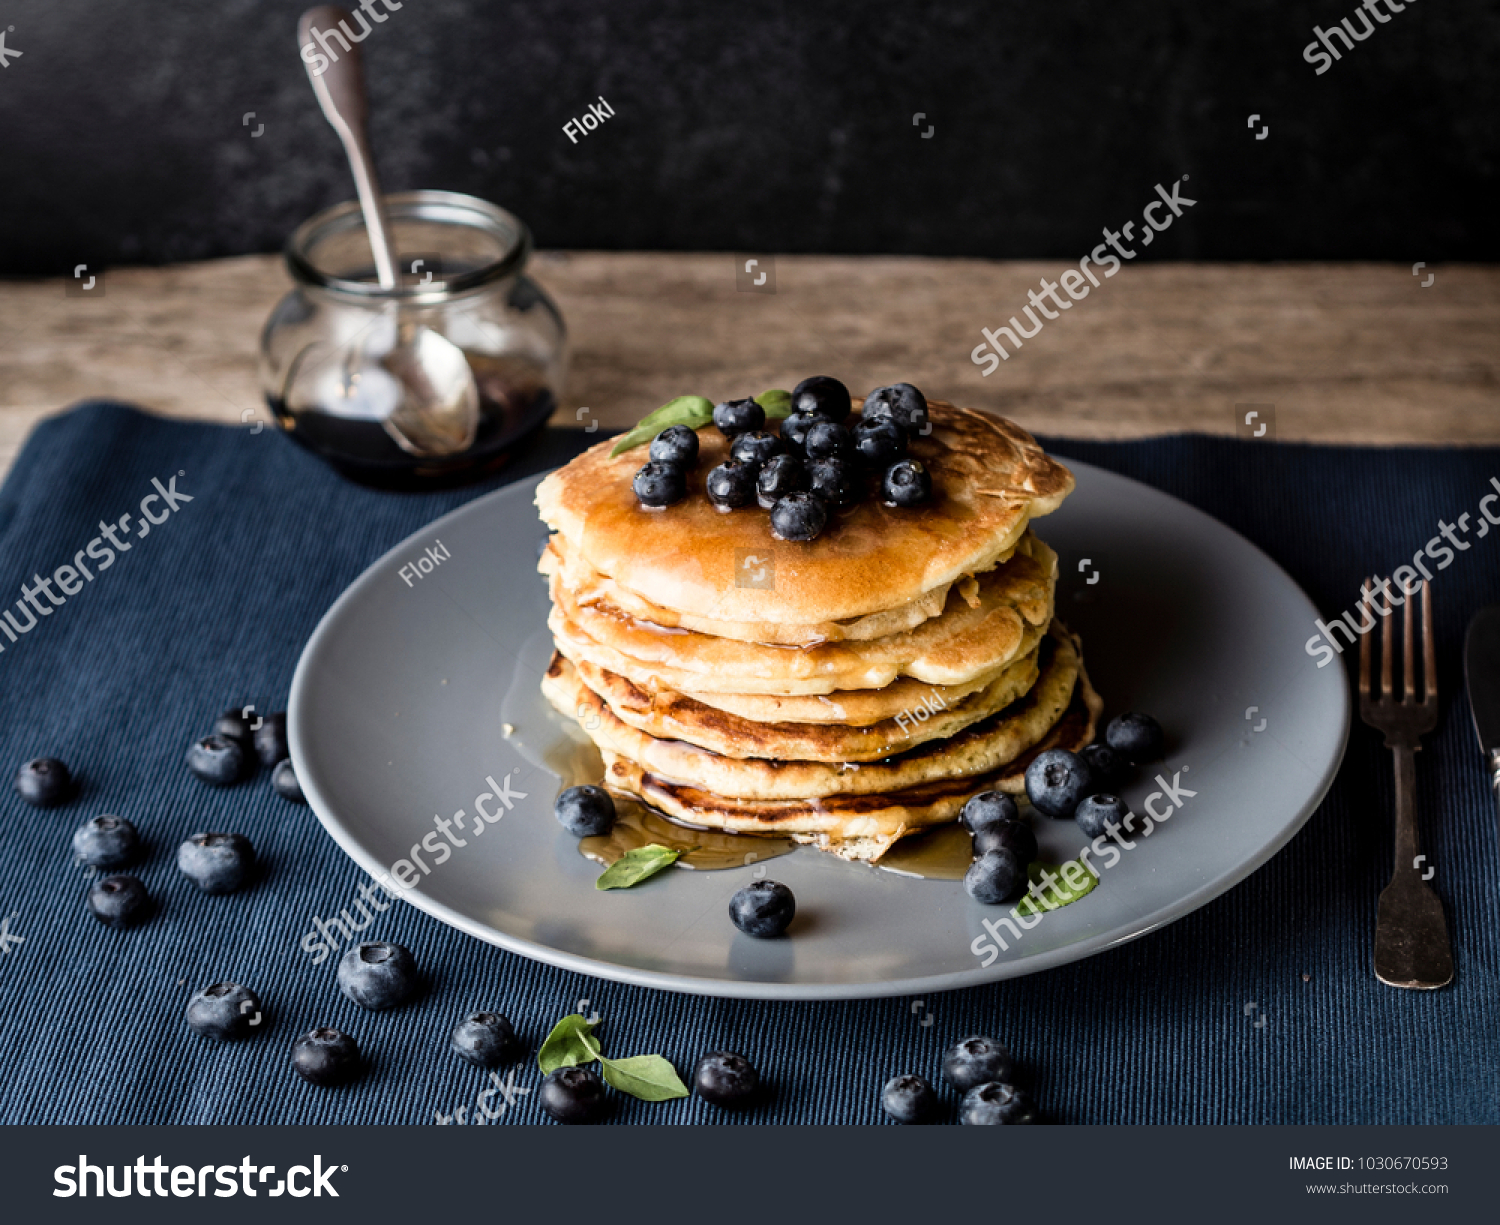 image shows a homemade fluffy pancake with blueberry on the top; situation is decorated with rustiv wooden table, placemat, silver cutlery, honey glass #1030670593